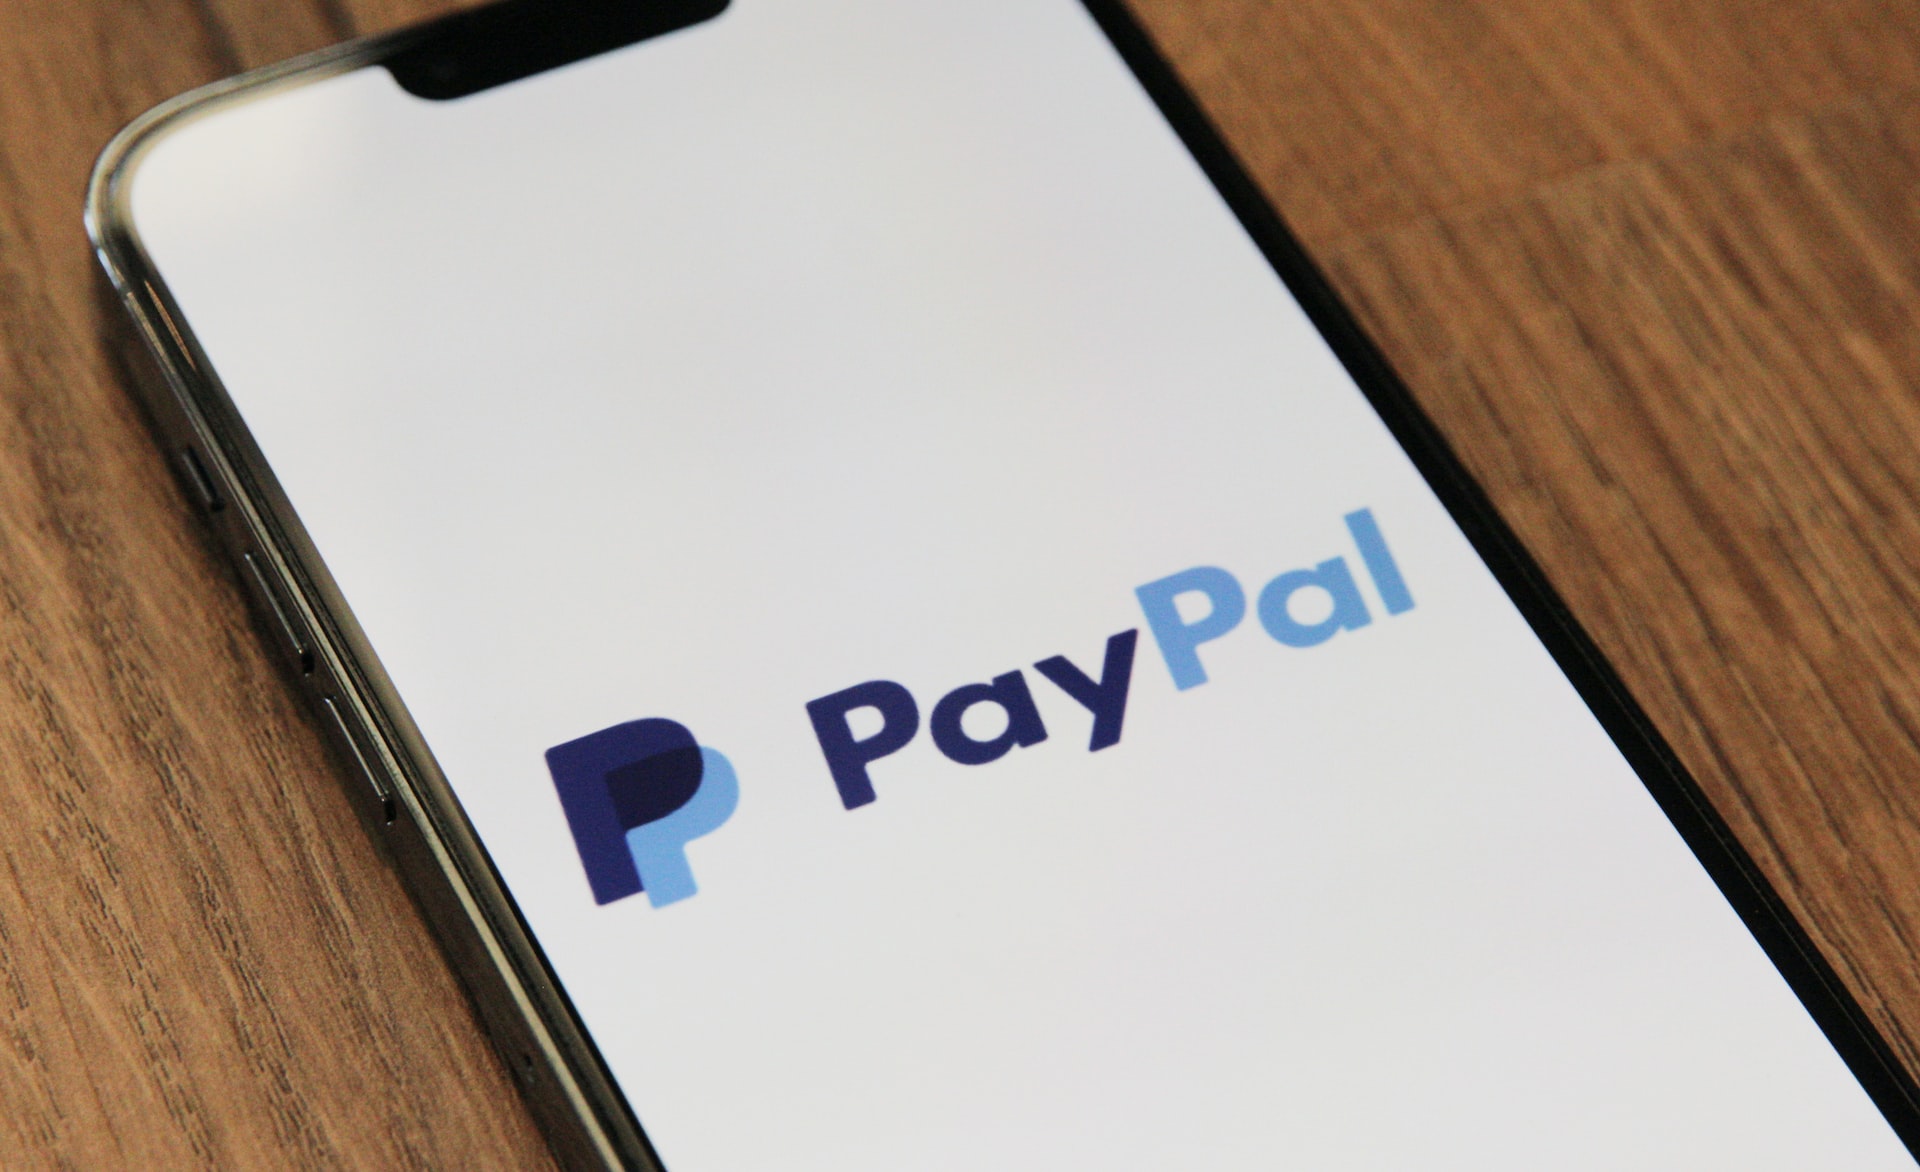 Pros and Cons of Using Paypal